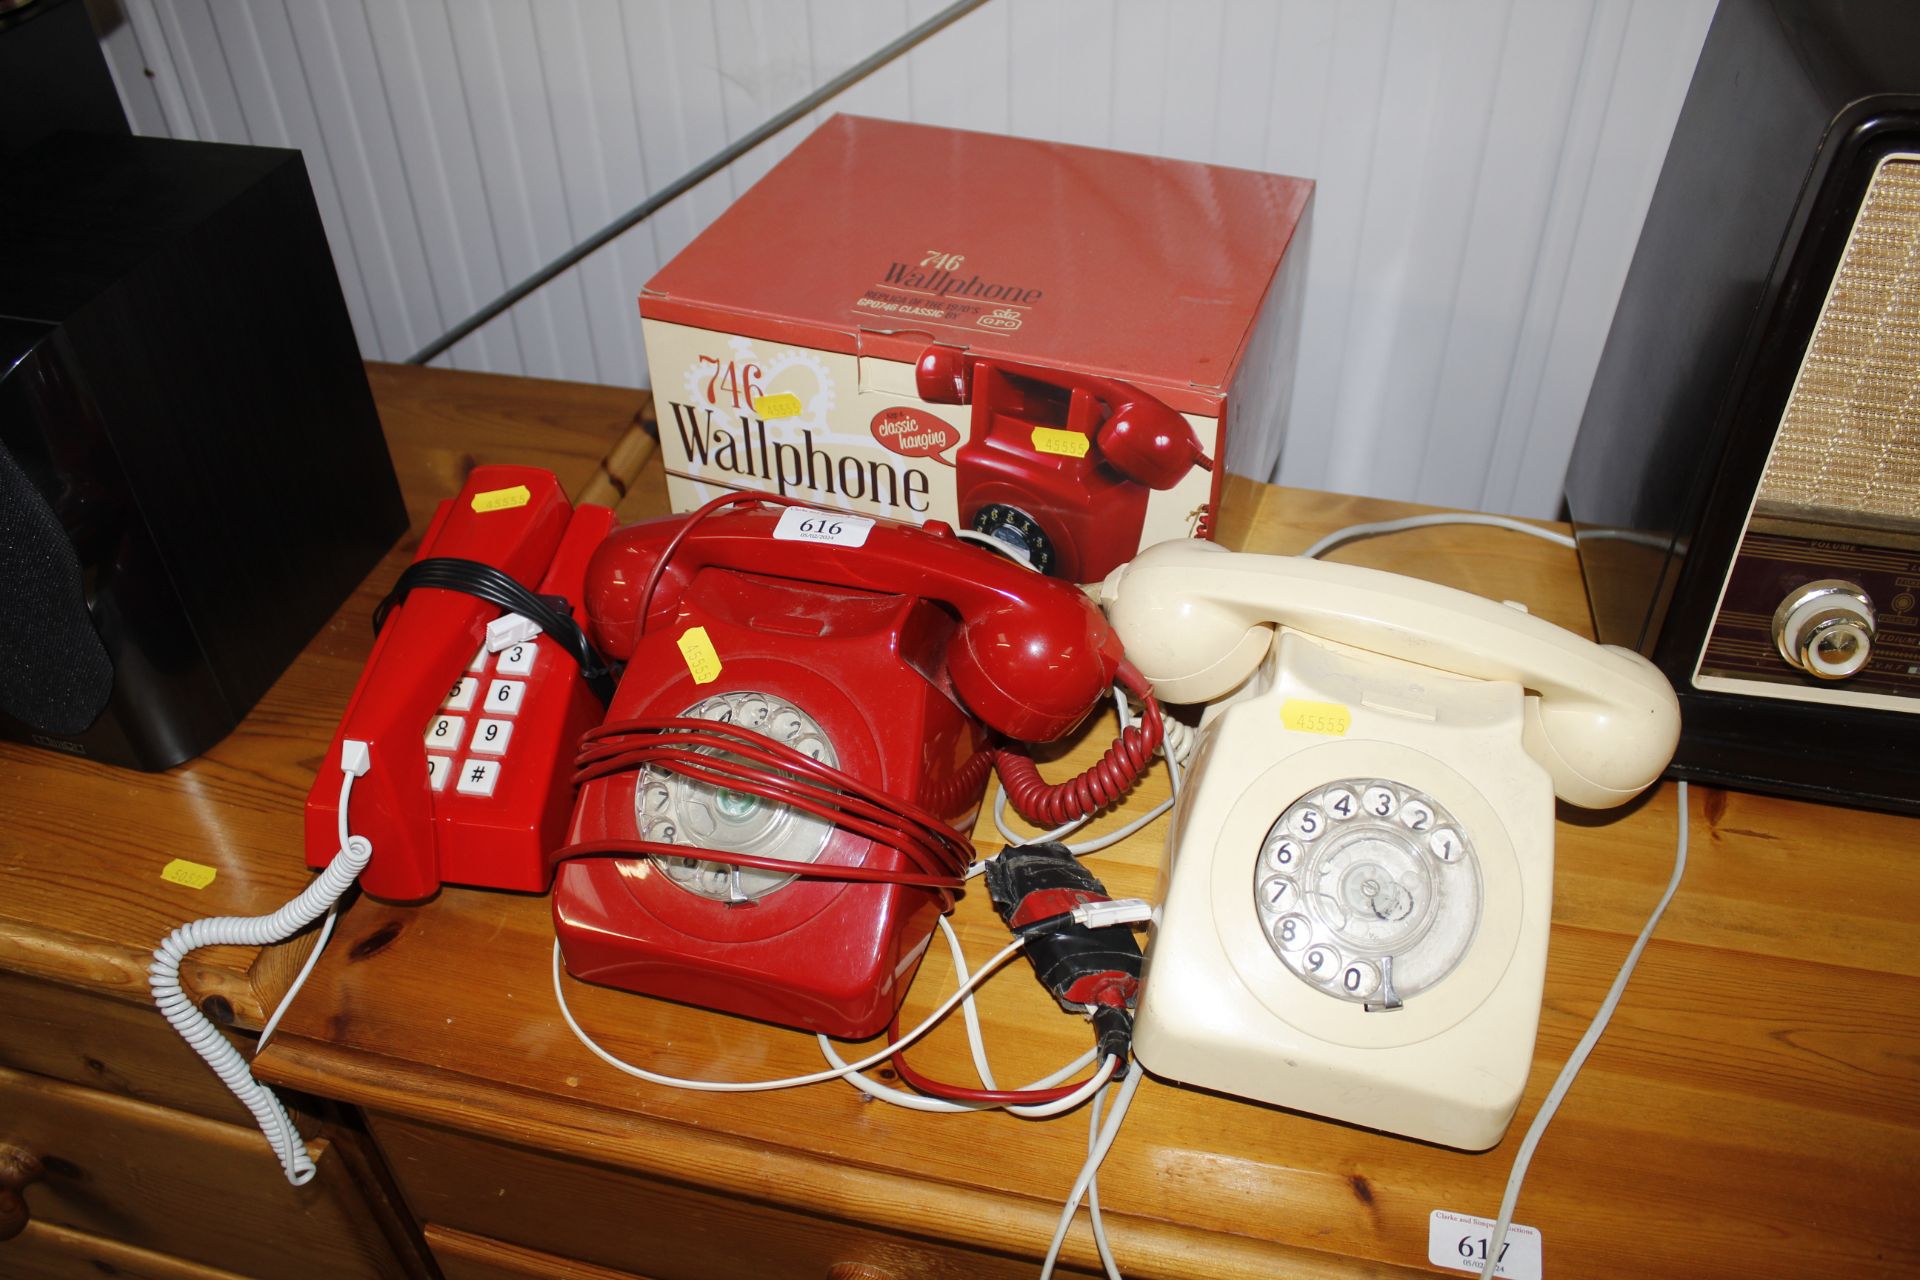 Two rotary dial telephones, retro style phone and